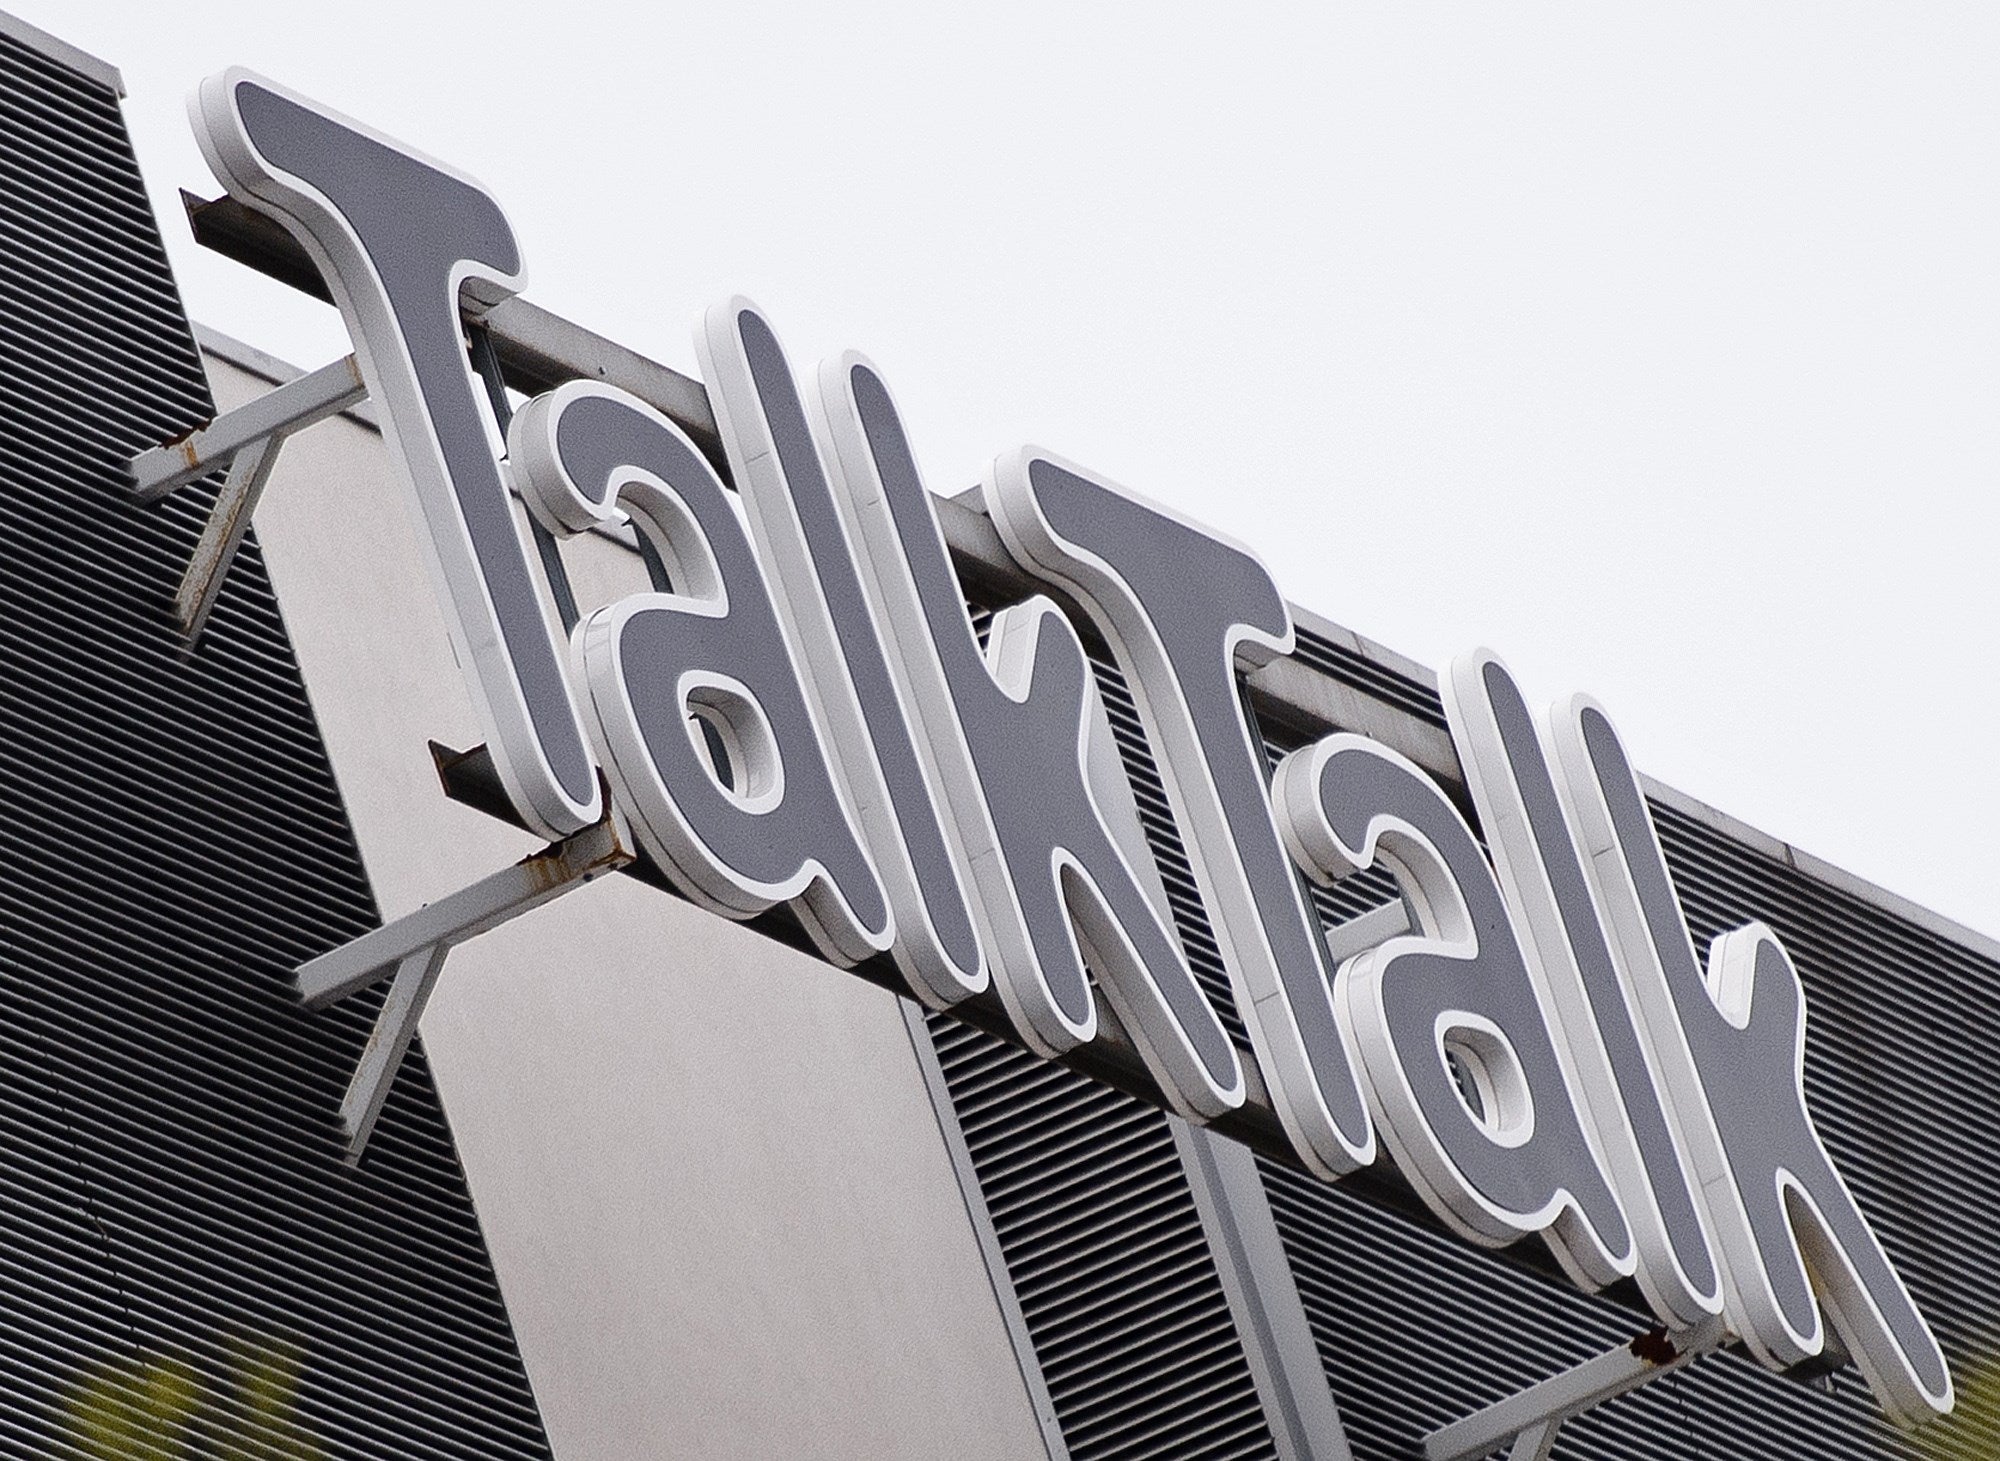 TalkTalk pulled in 46,000 more customers during the half-year period